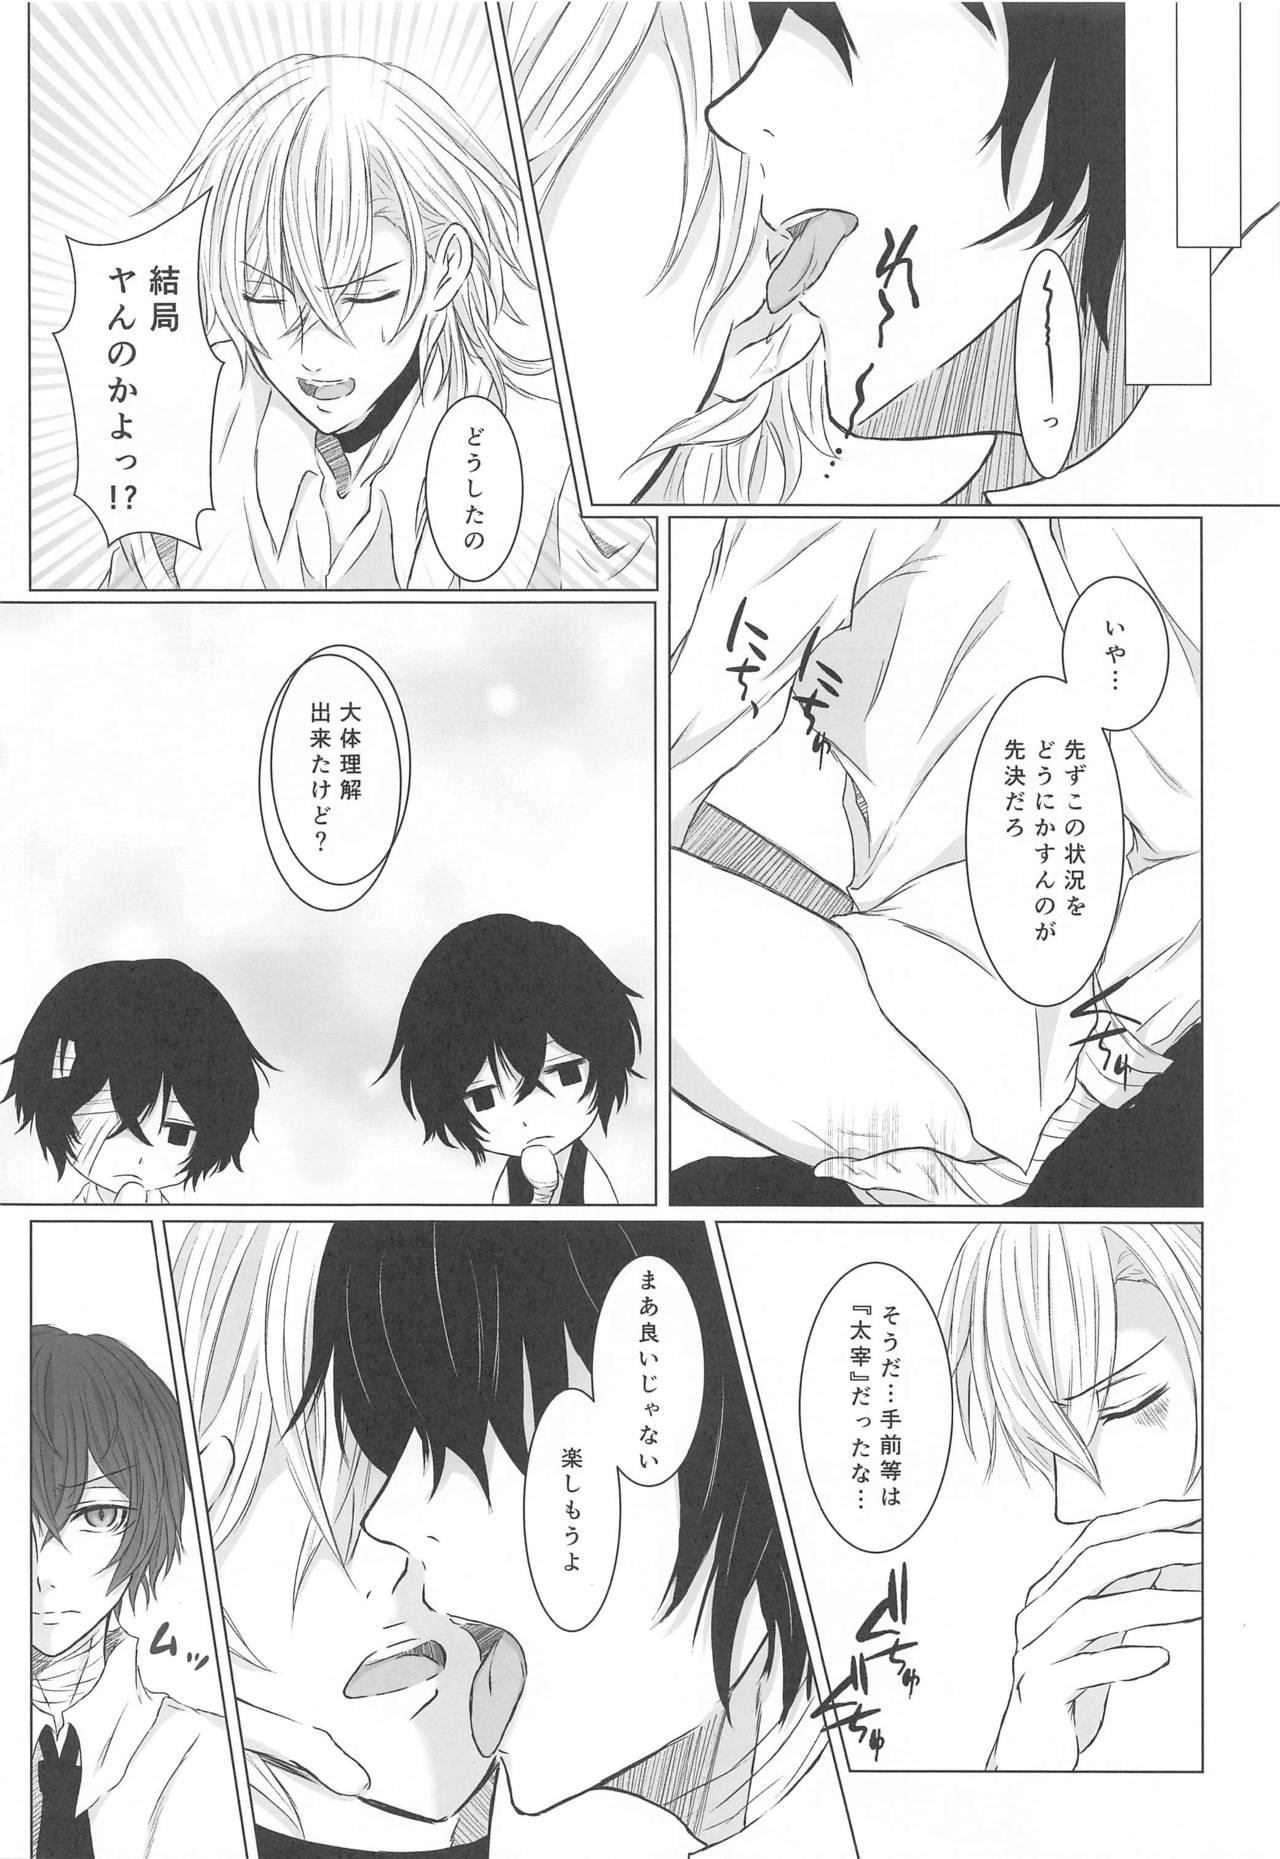 Ladyboy Aibou Sand - Bungou stray dogs Chaturbate - Page 7